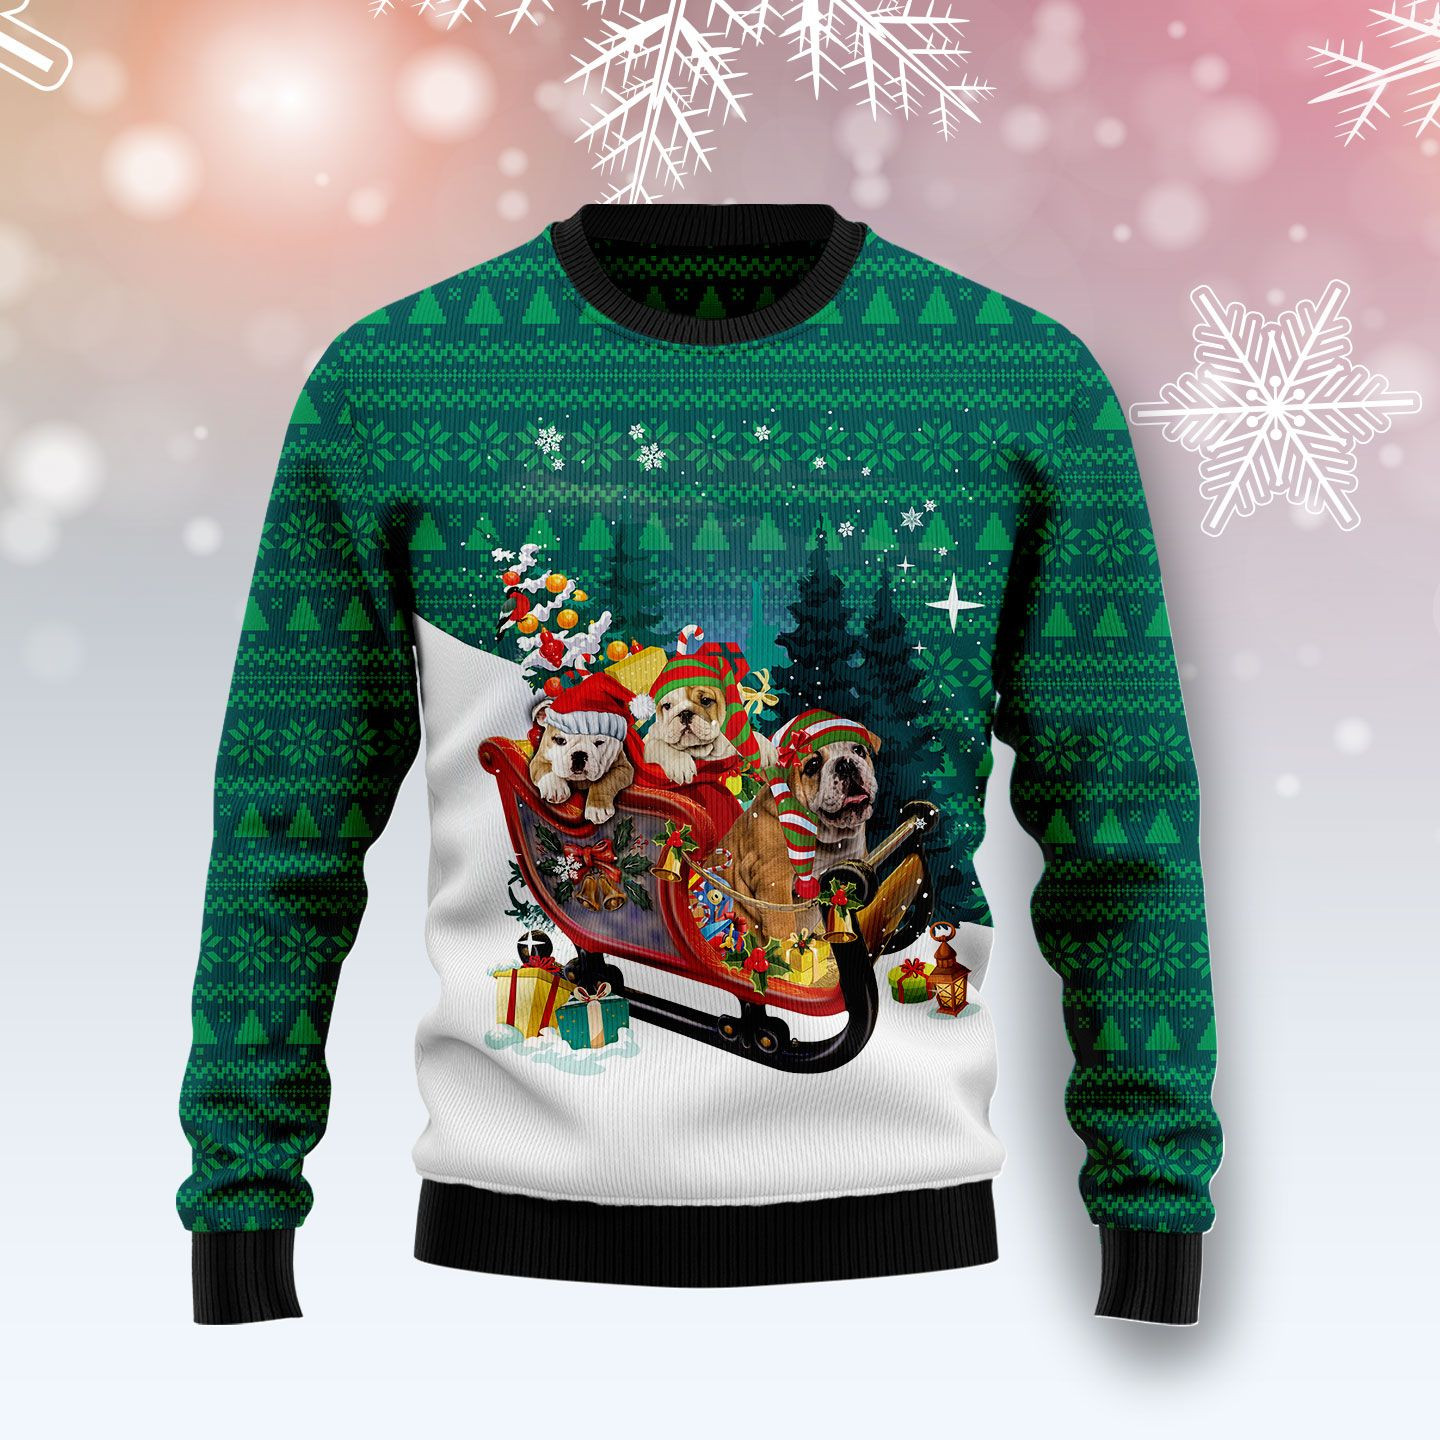 Bulldog Sleigh Ugly Christmas Sweater Ugly Sweater For Men Women